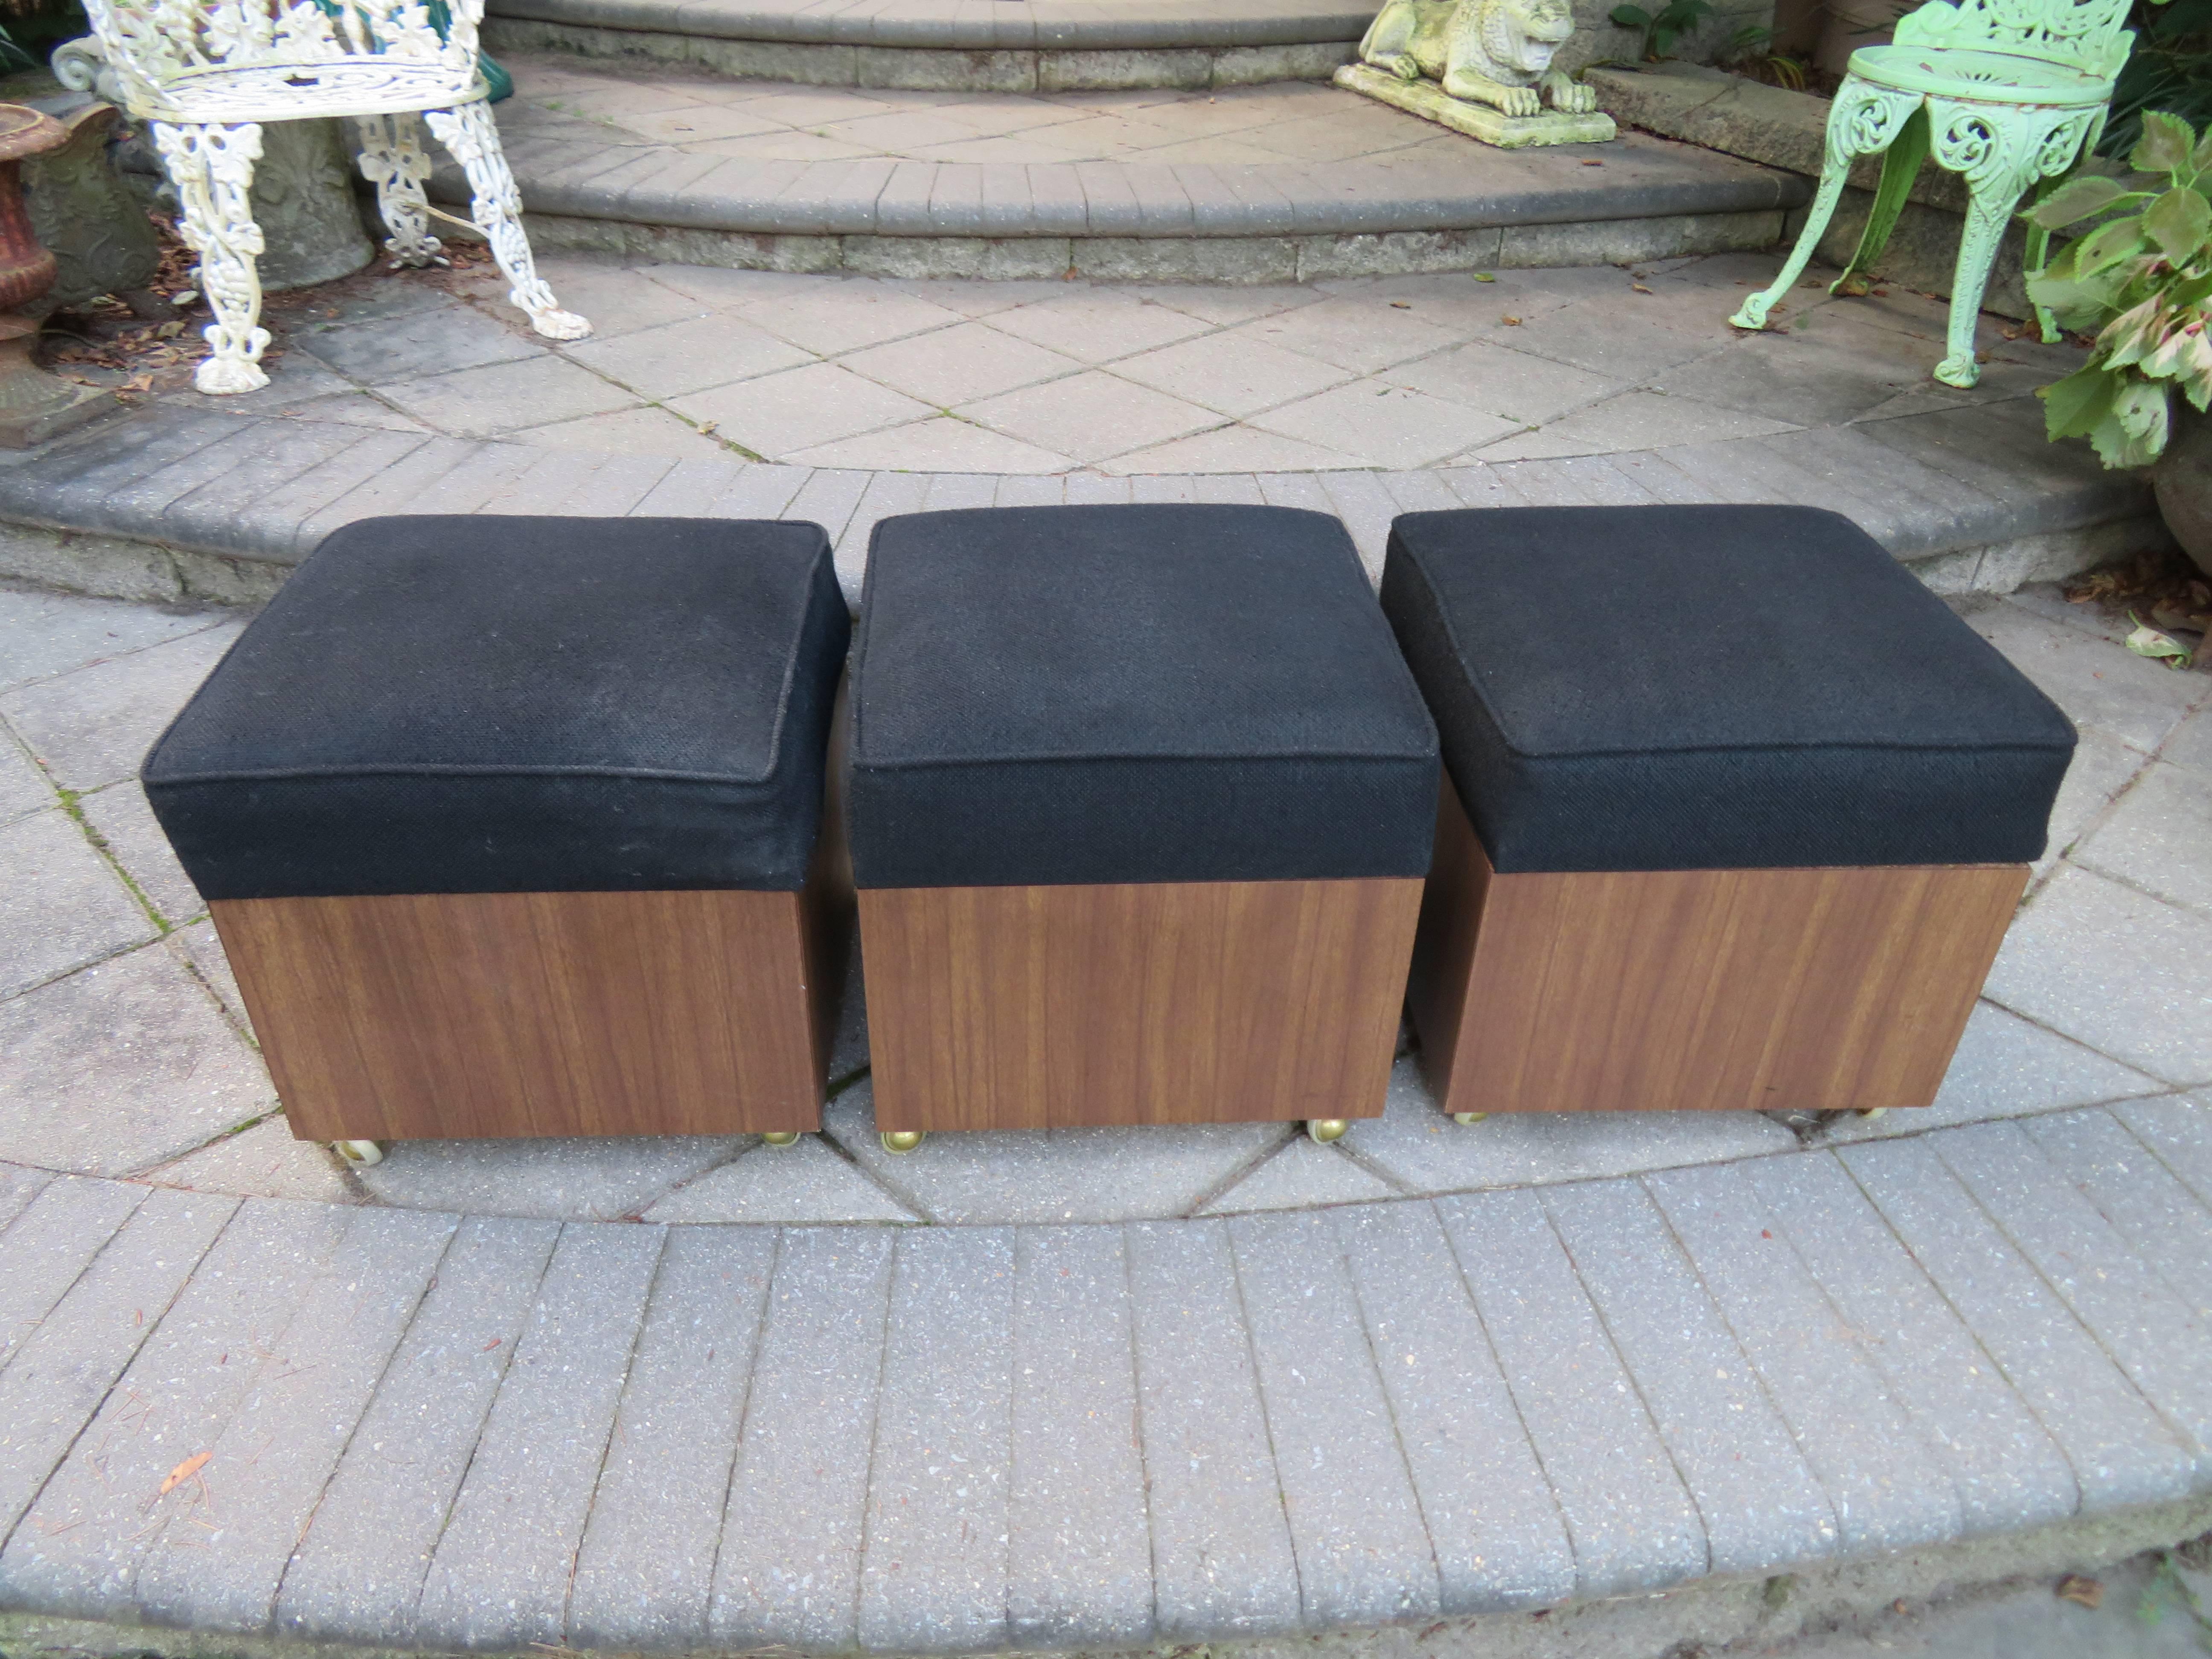 Great set of three Mid-Century Modern rolling storage cube stools. Each stool has a thick black wool seat pad that lifts off to reveal a great space for storage-magazines or toys. Rolling cases are laminated with wood grain Formica and look great.